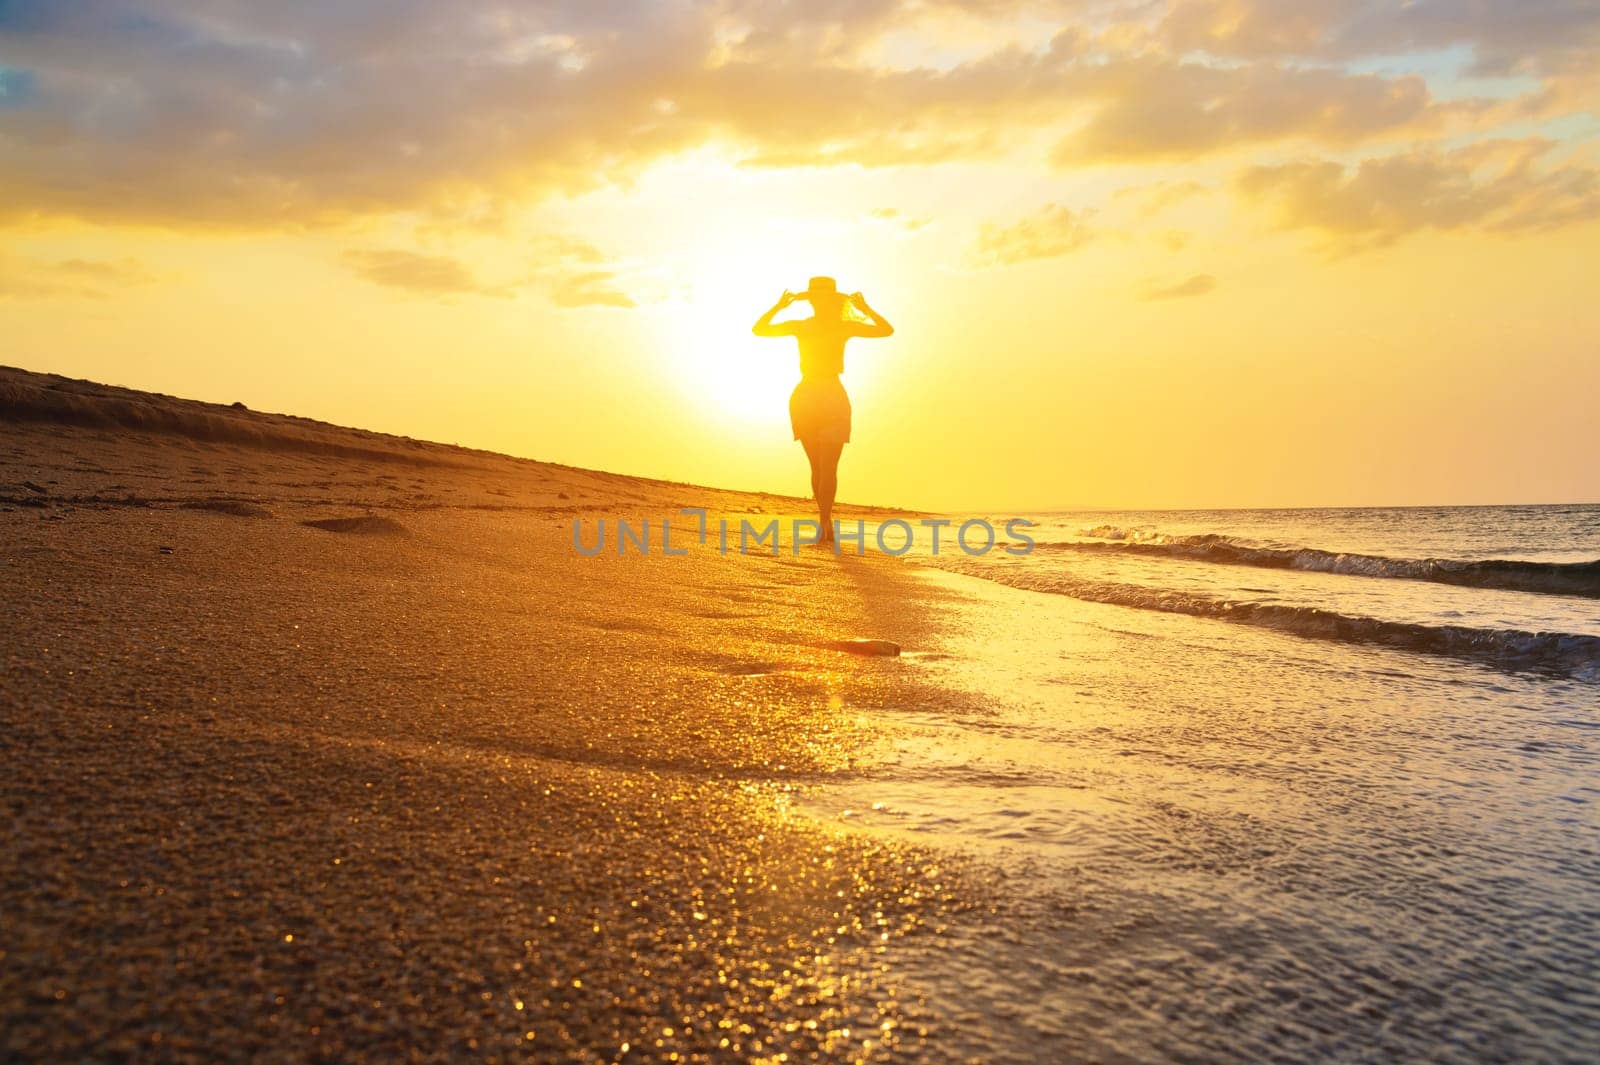 Happy slim young woman carefree walking on the beach with calm waves at sunset. Silhouette landscape with a slender woman and a golden sandy beach.